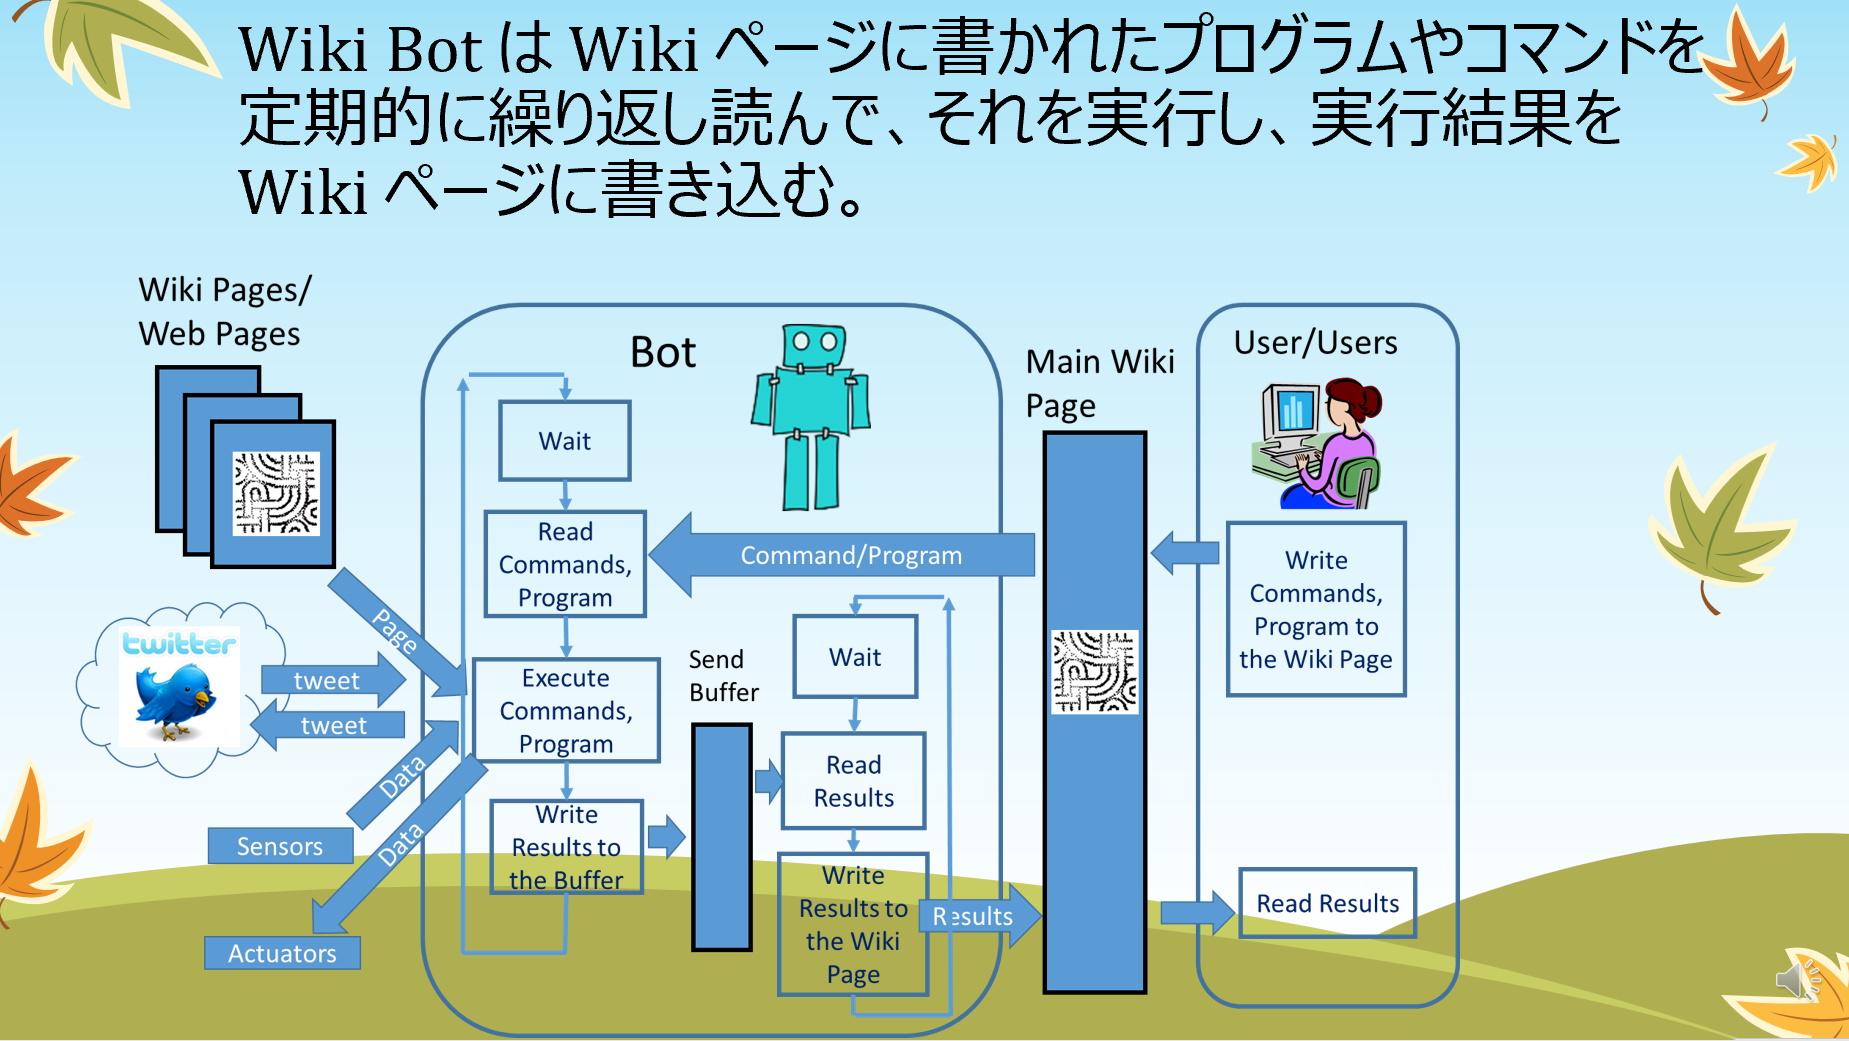 wikibot-03.png